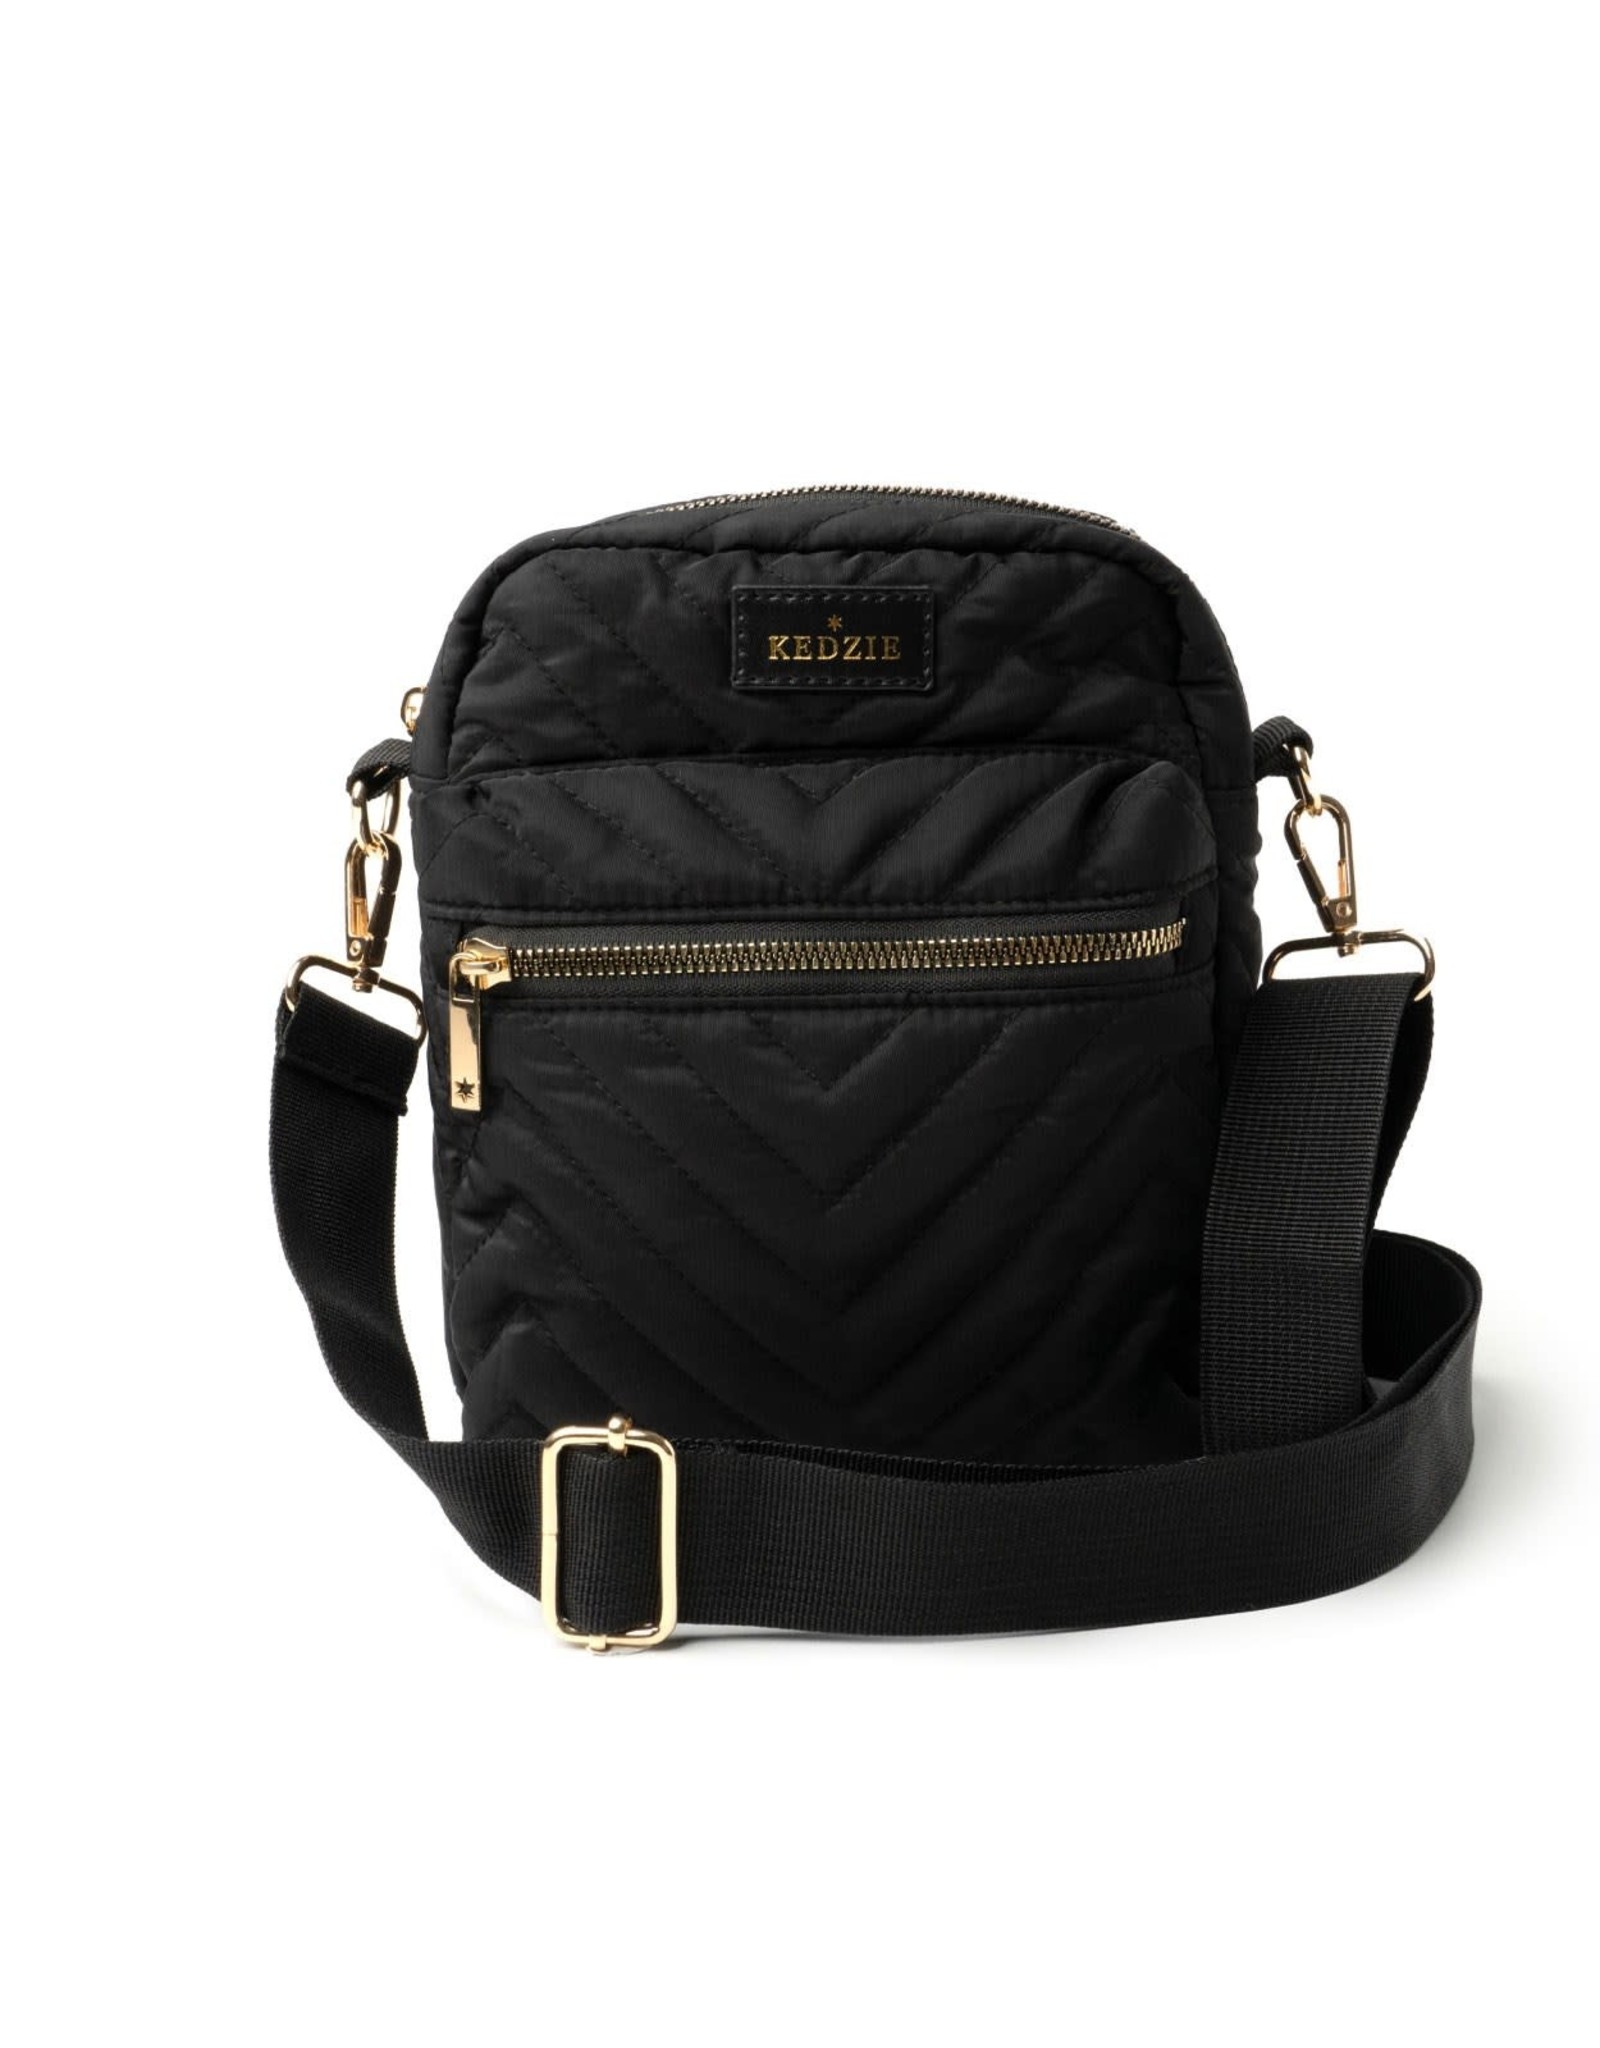 Black Cloud 9 Quilted Crossbody